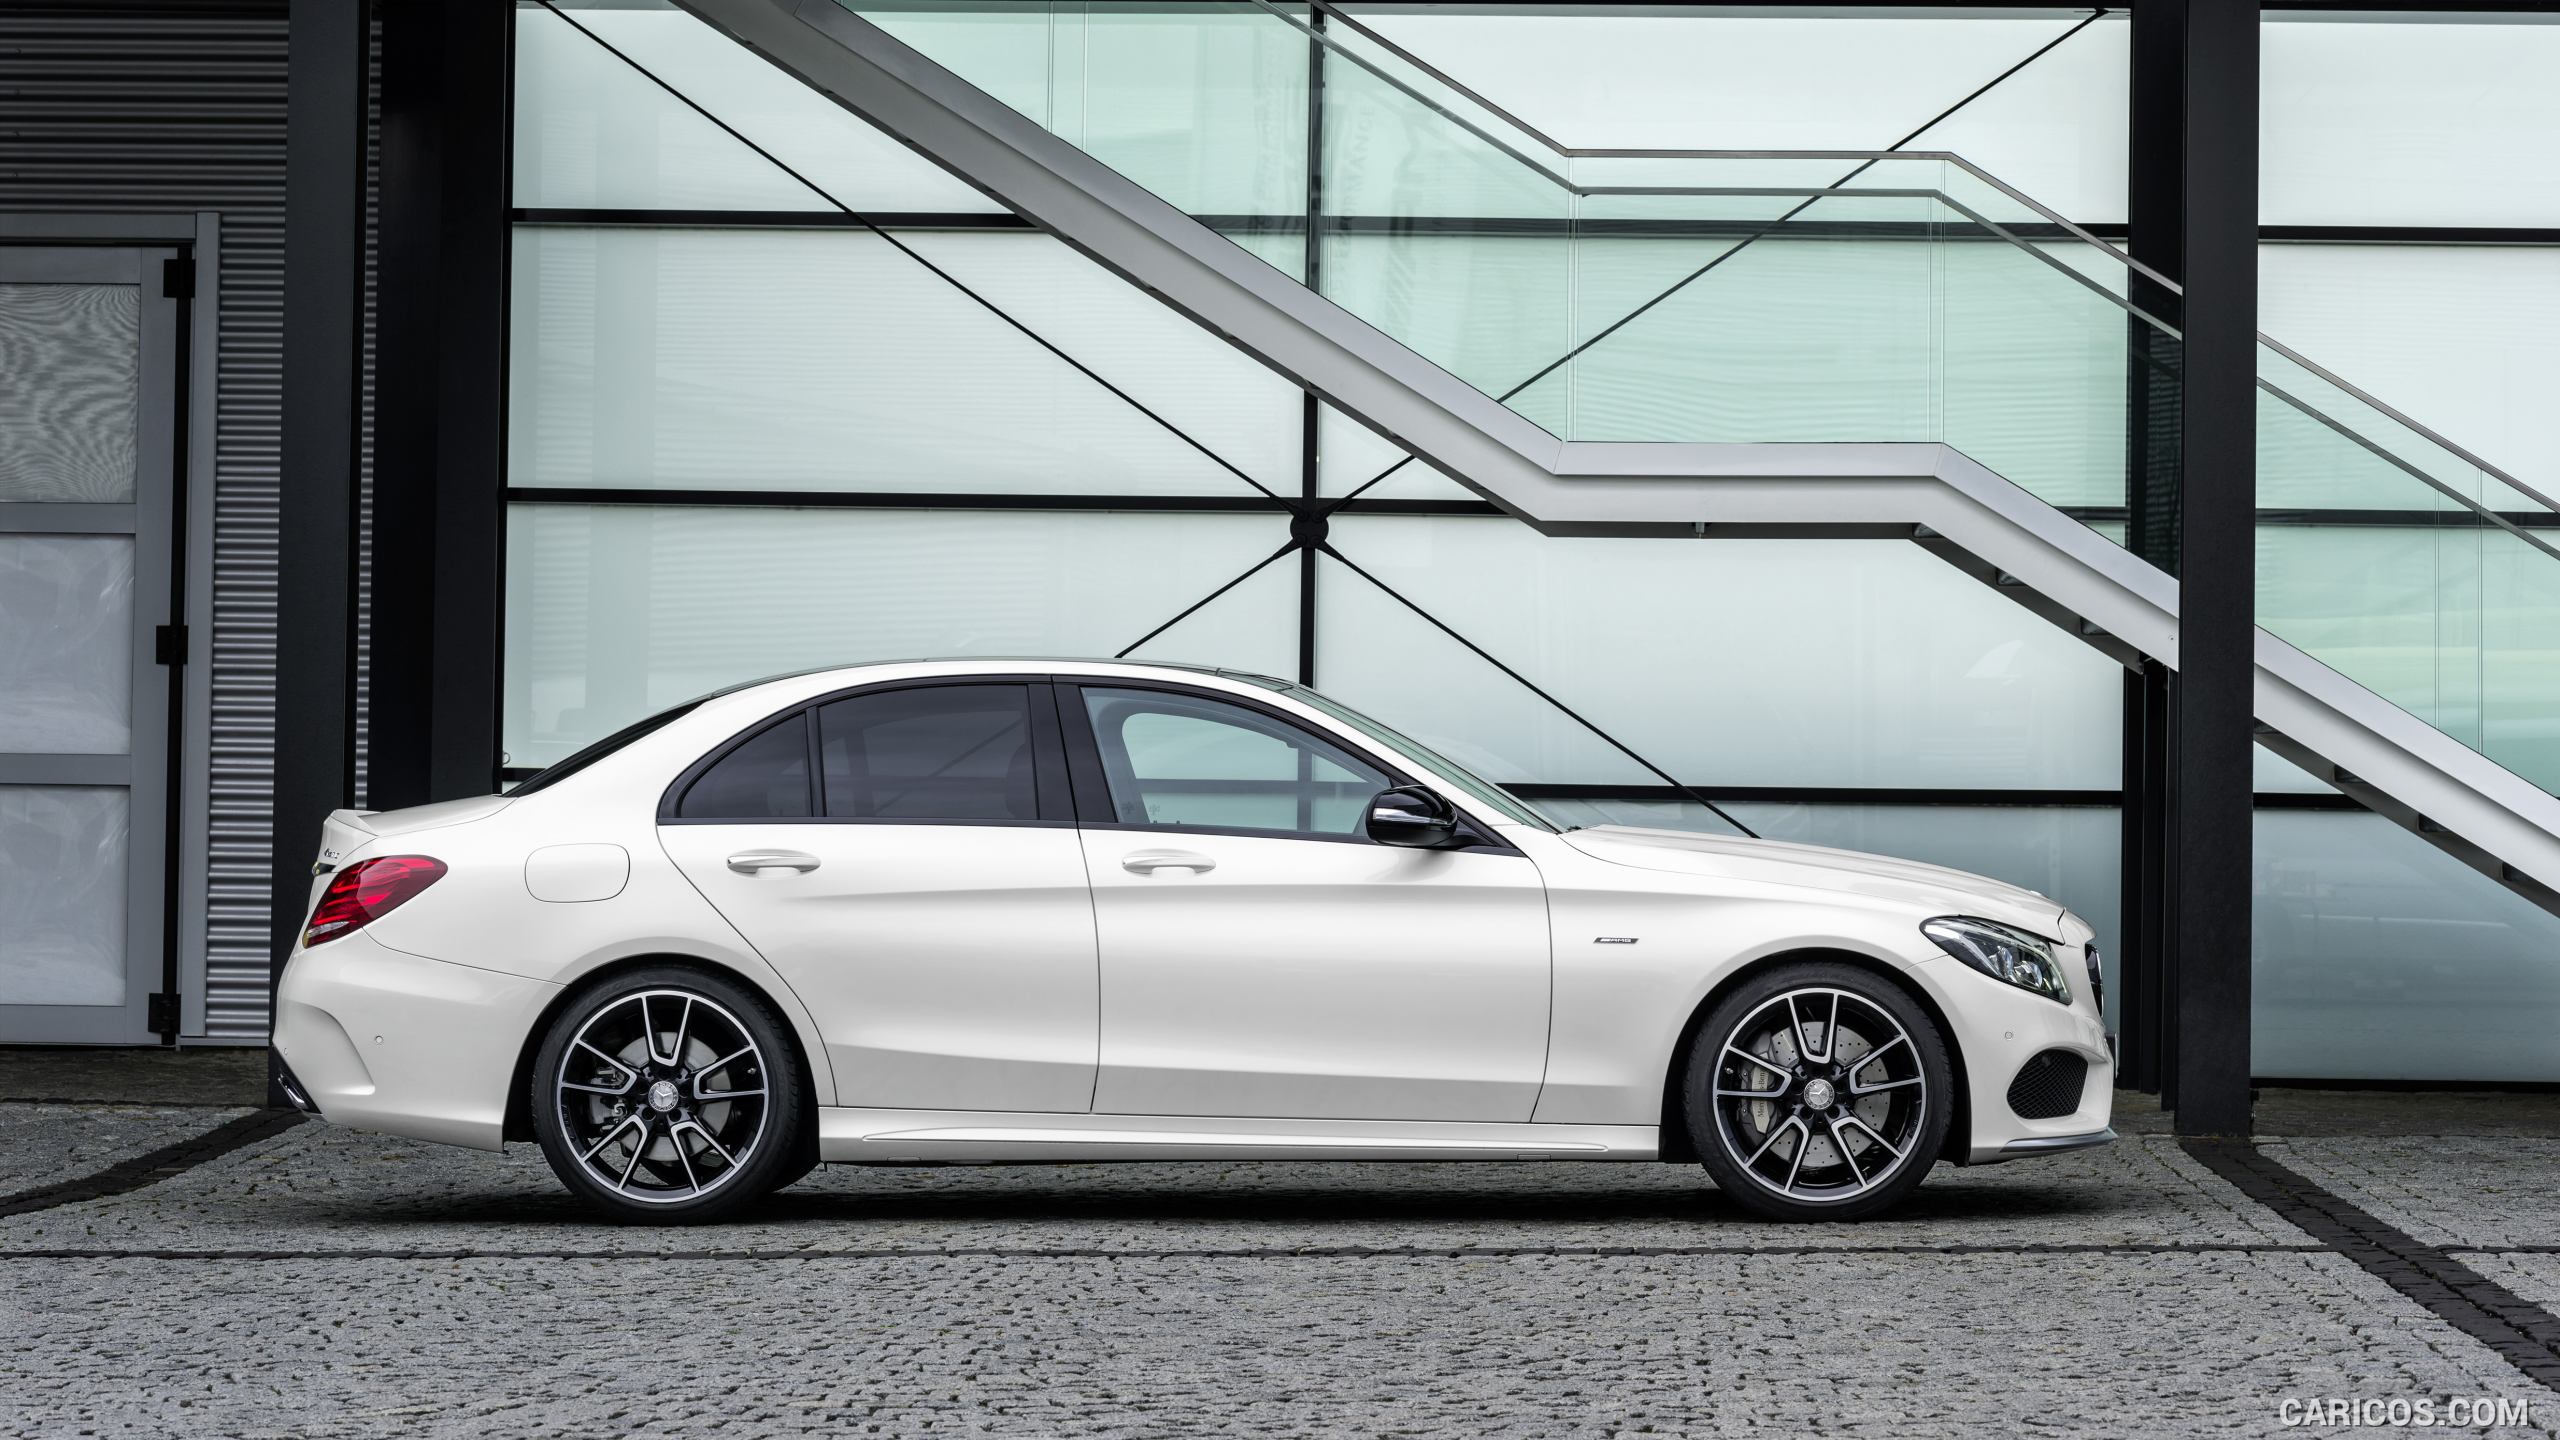 2016 Mercedes-Benz C450 AMG 4MATIC (Diamond White) - Side, #6 of 122